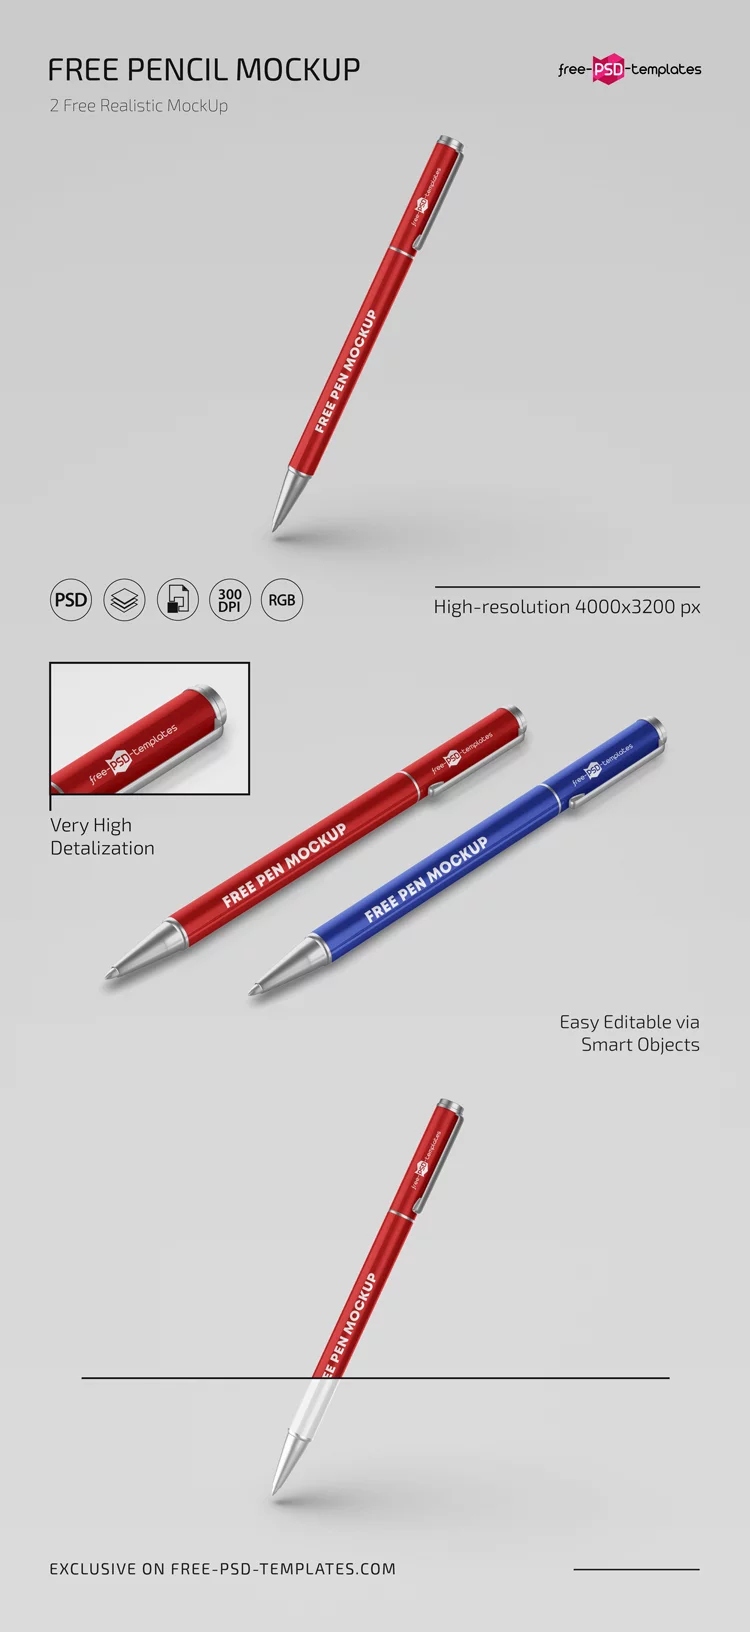 Free Pencil Mockup Template in PSD